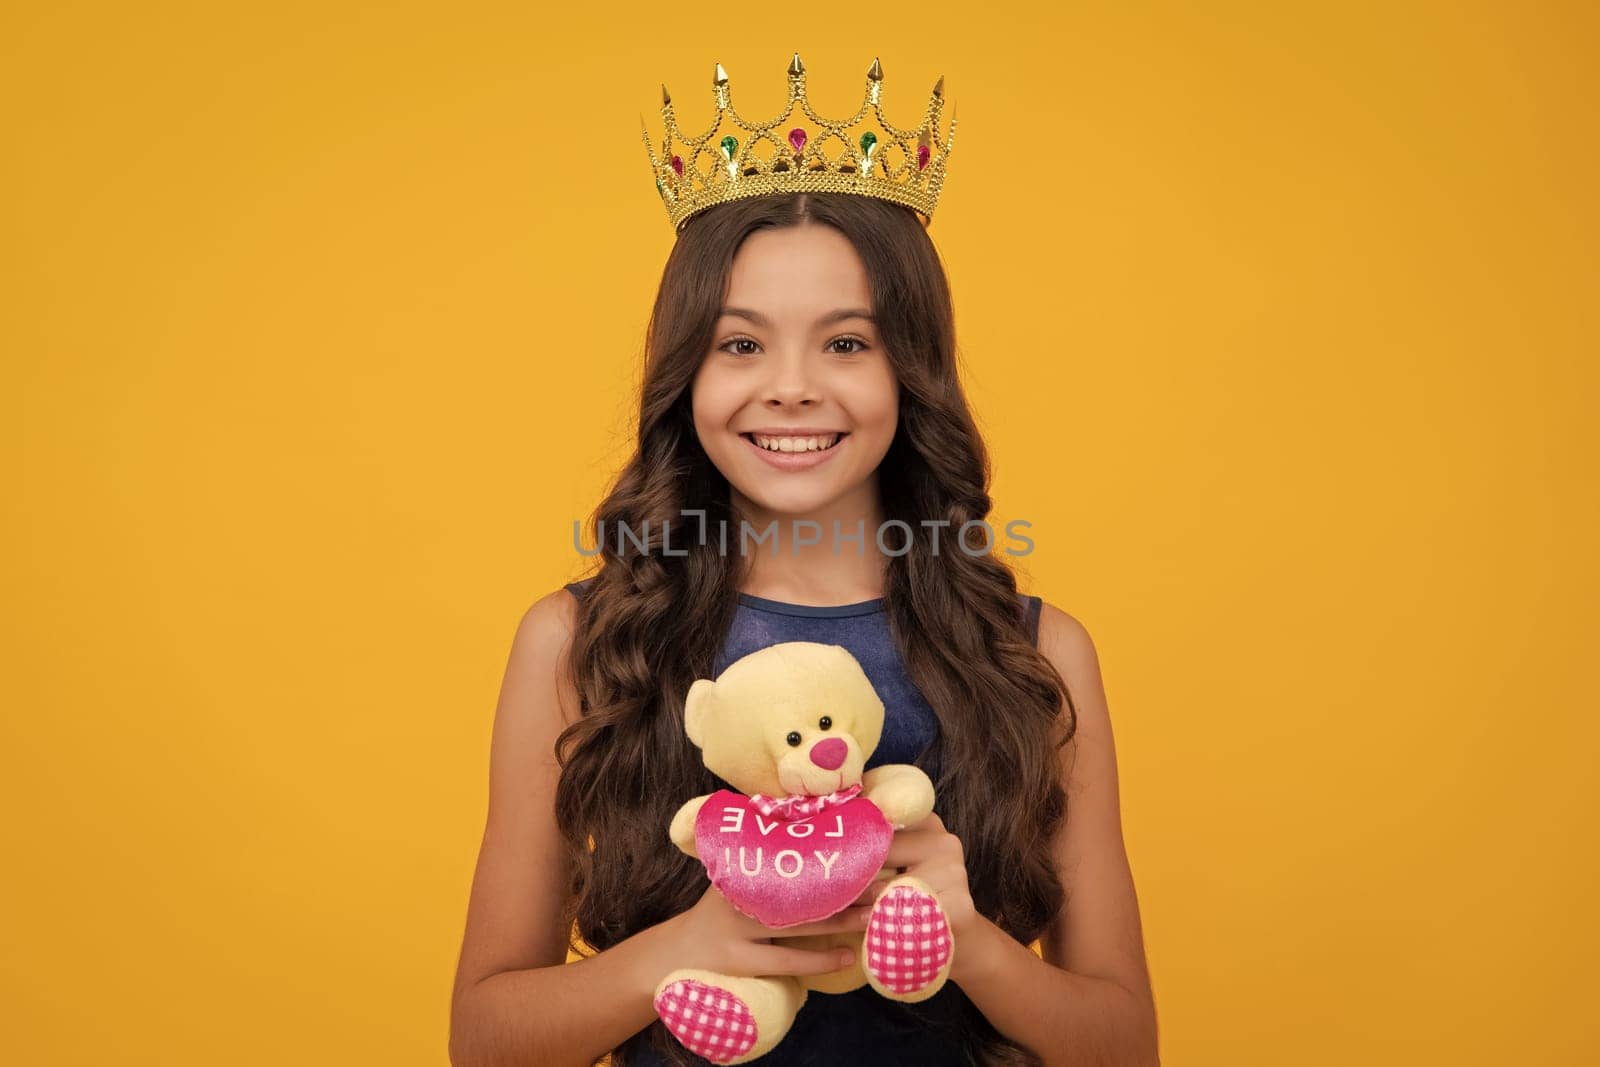 Birthday kids prom party. Girls party, funny kid in crown. Child queen wear diadem tiara. Cute little princess portrait. Happy girl face, positive and smiling emotions